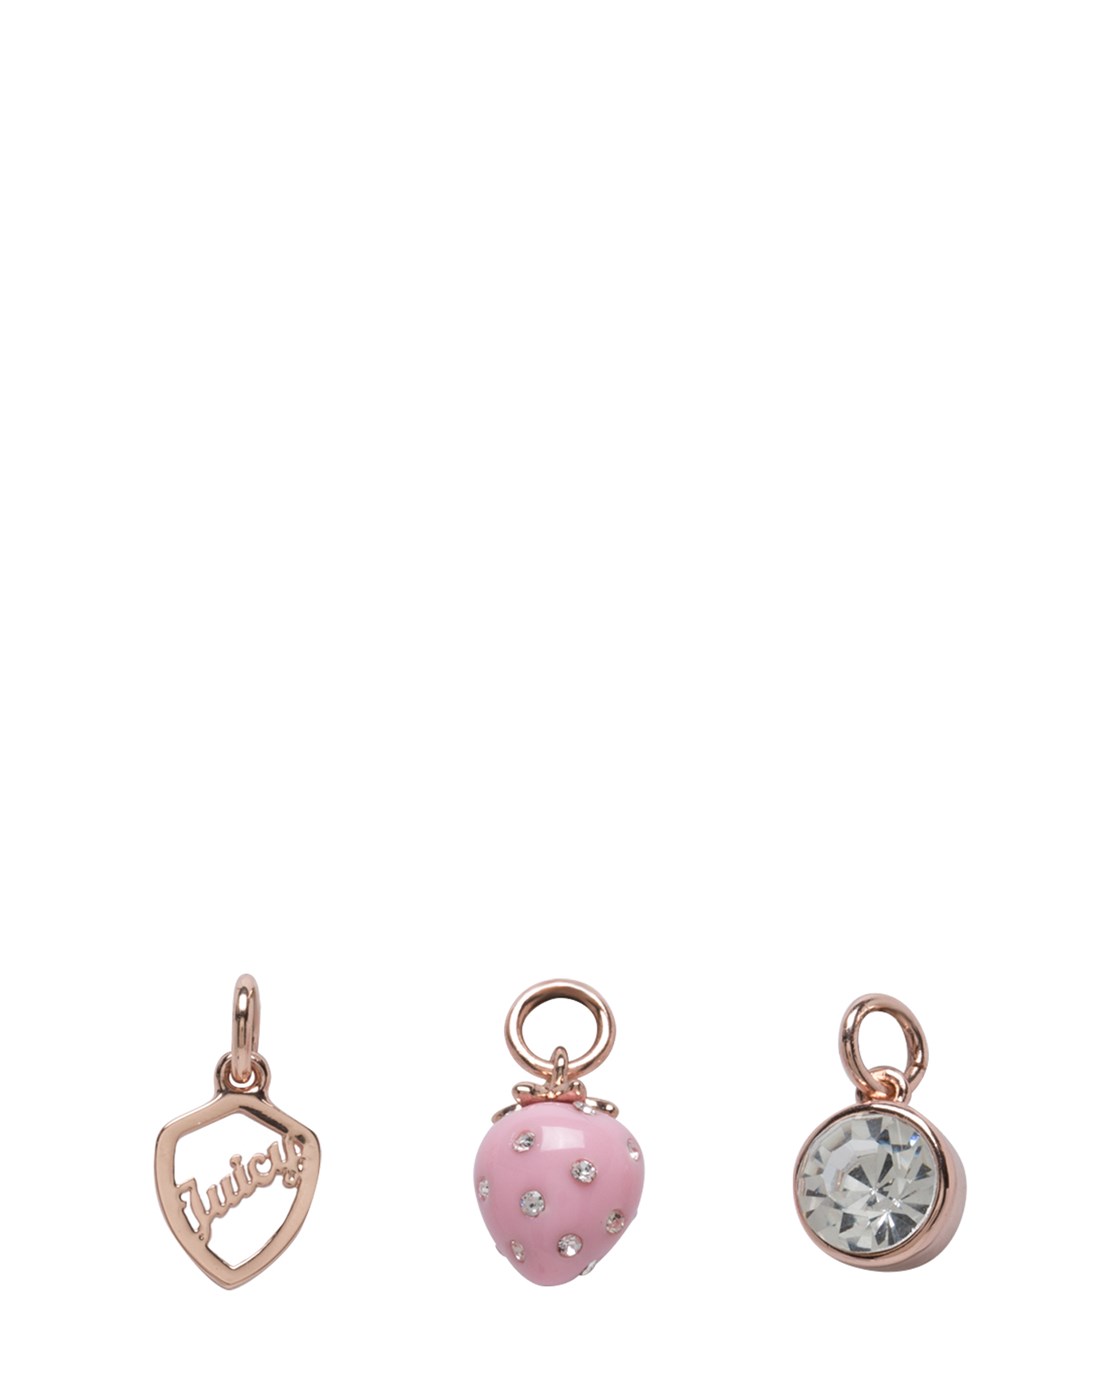 Juicy Couture COUTURE YOURSELF STRAWBERRY CHARM SET